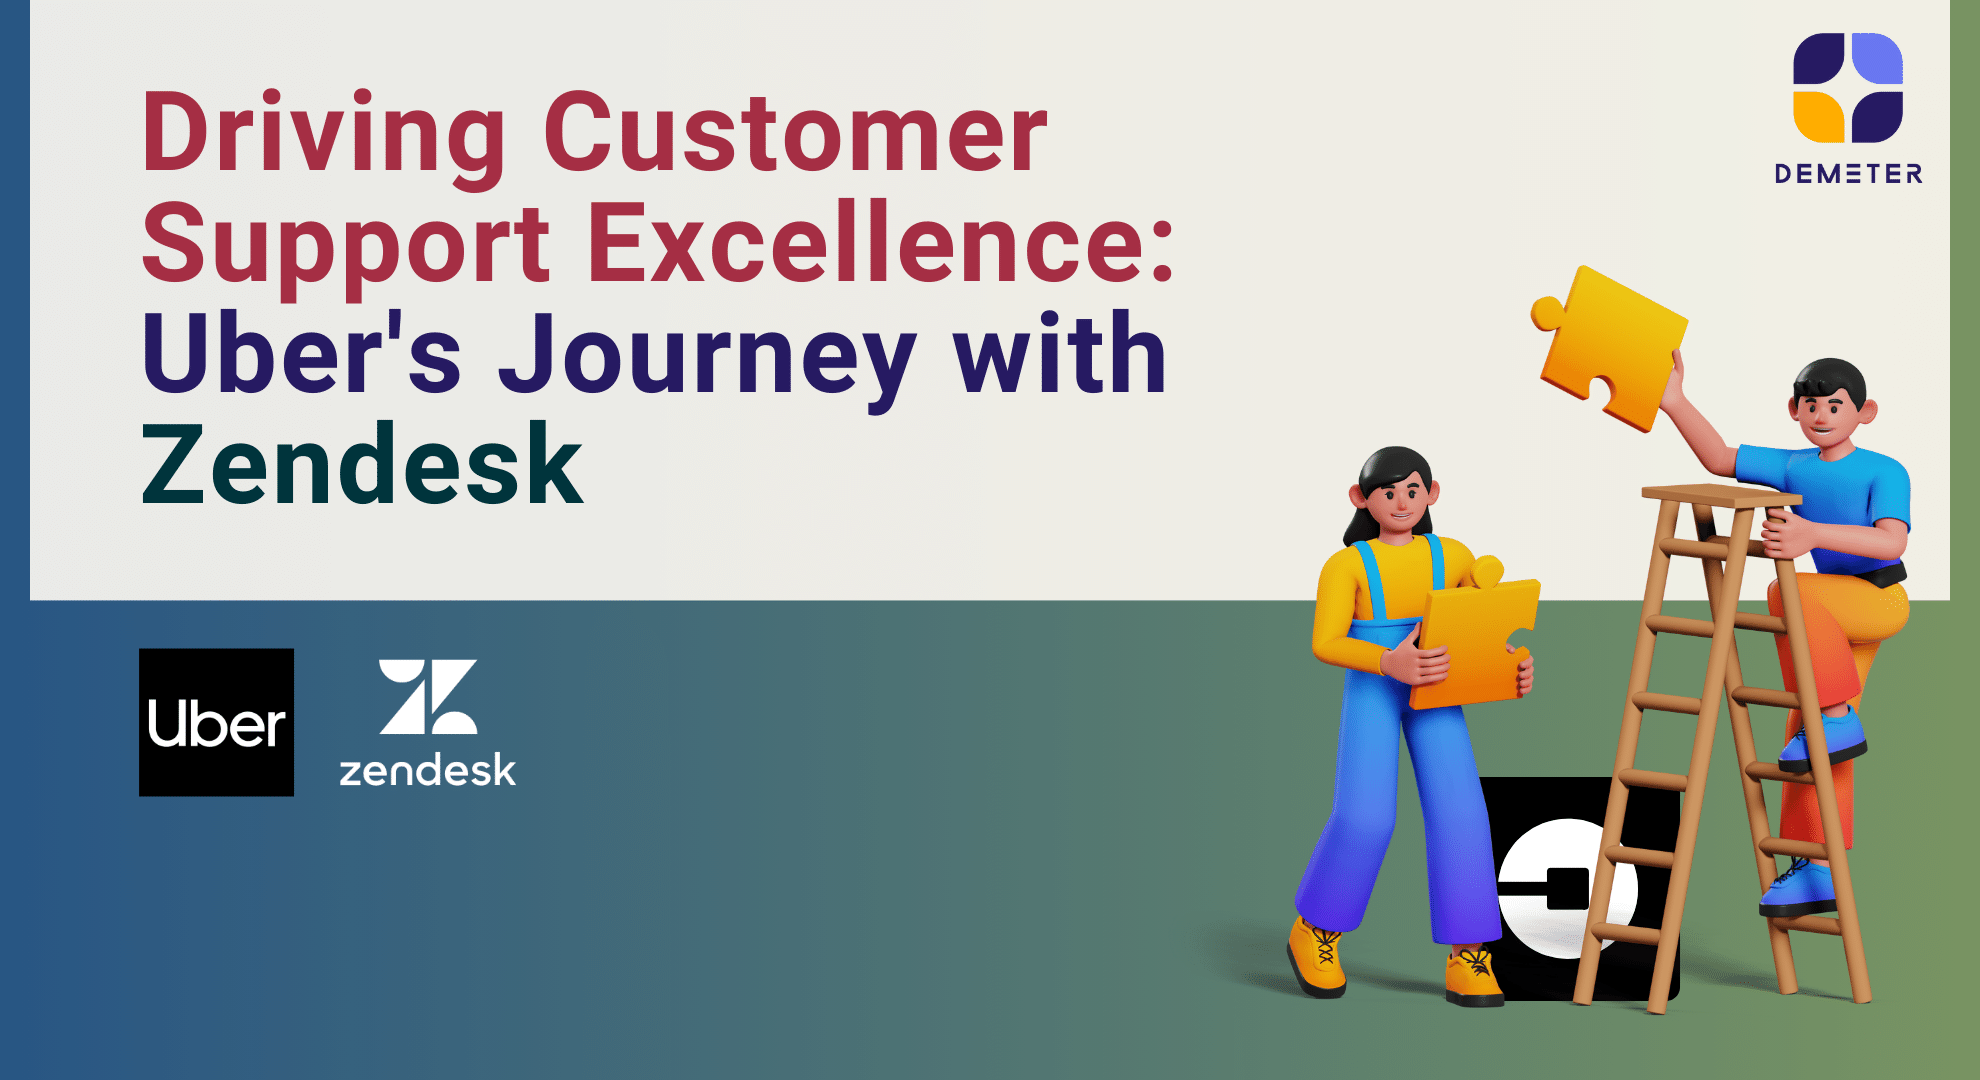 Driving Customer Support Excellence Uber's Journey with Zendesk